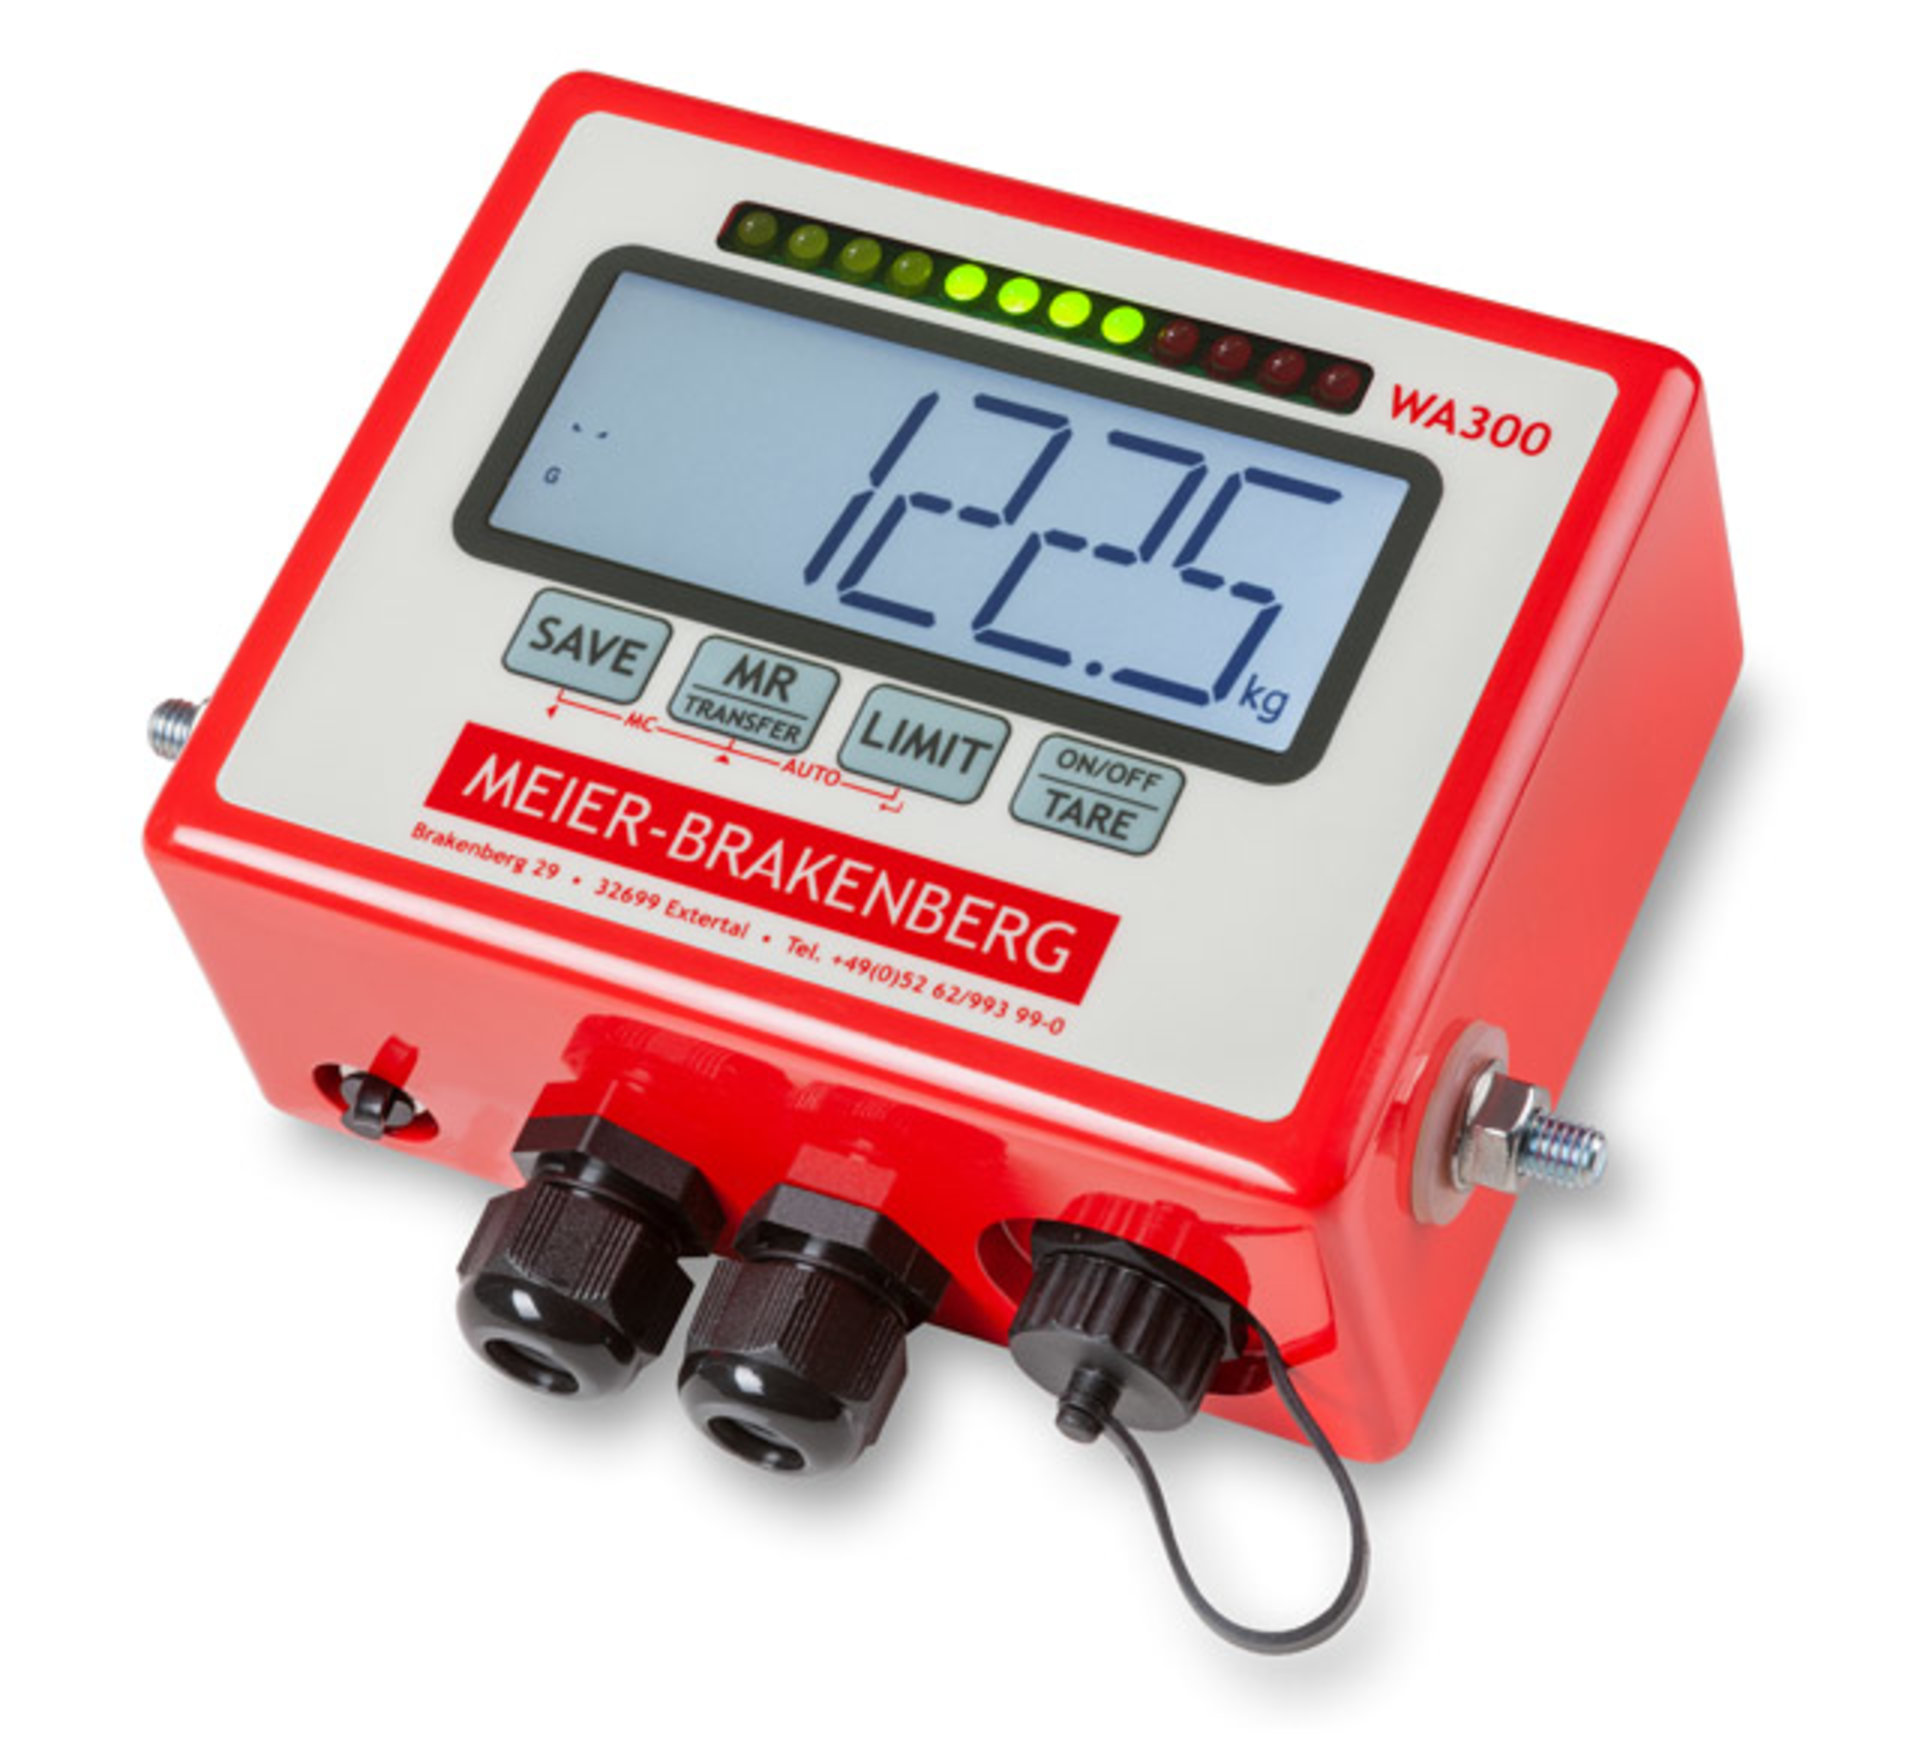 The new weighing display WA300 for mobile animal scales offers new functions. Data can be exported and stored on a USB stick. A traffic light function accelerates the sorting of slaughter pigs.